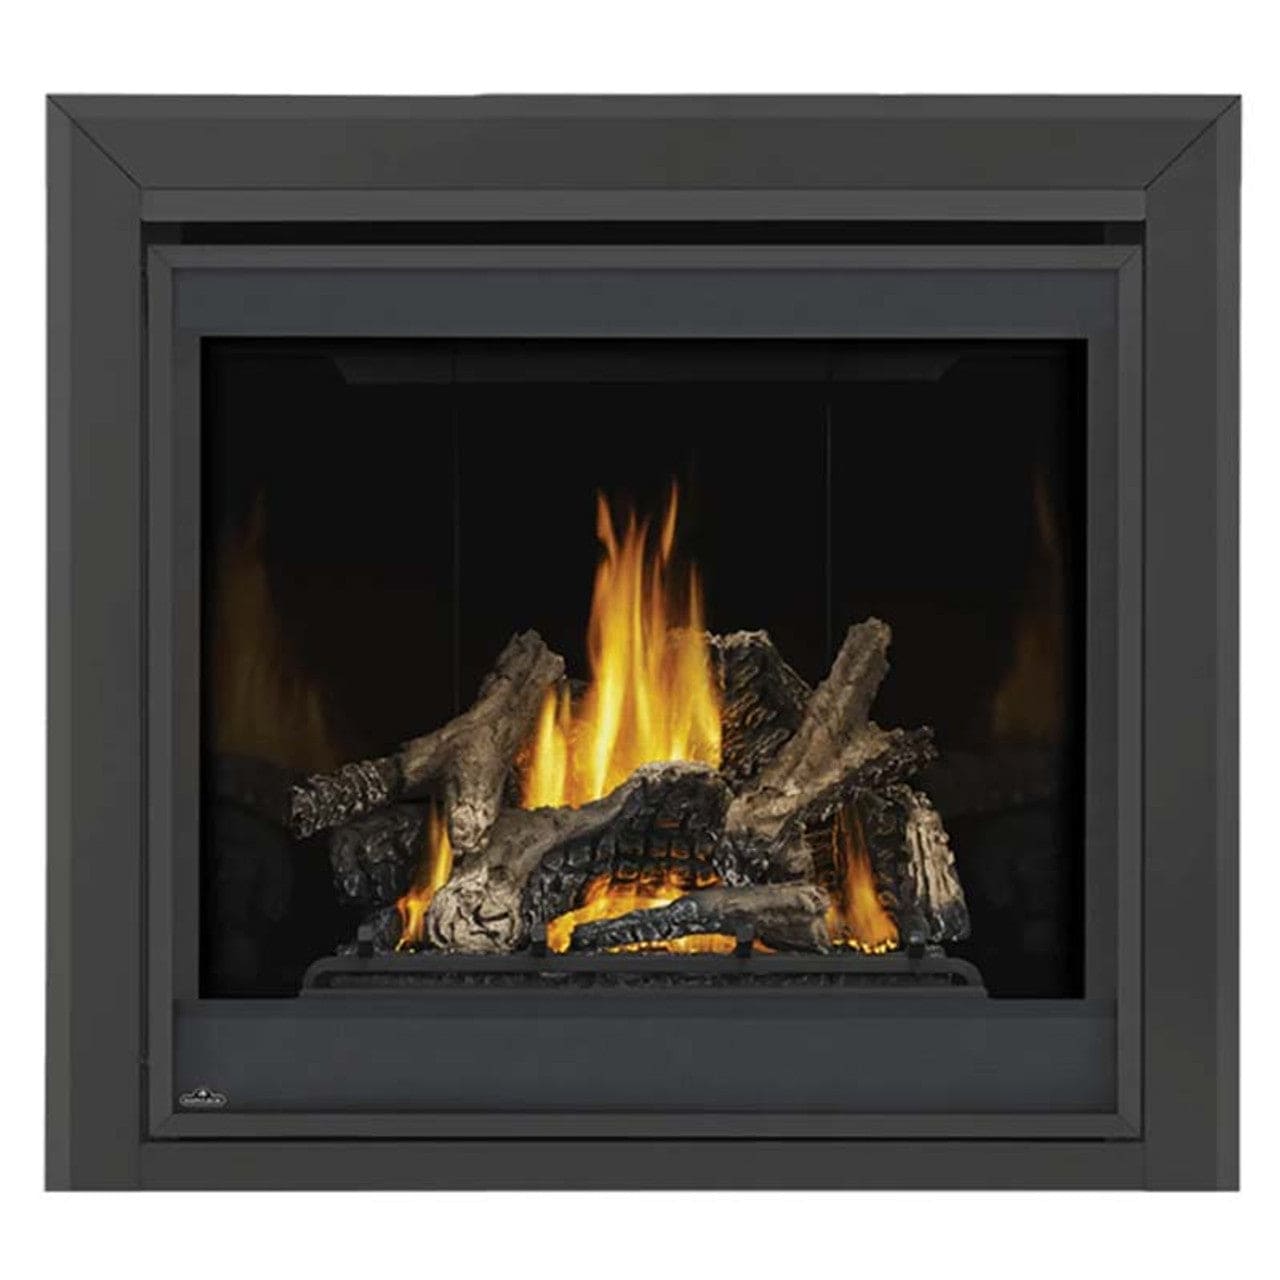 Napoleon Ascent 70 Direct Vent Electronic Ignition Natural Gas Fireplace - GX70NTE-1 - Chimney Cricket